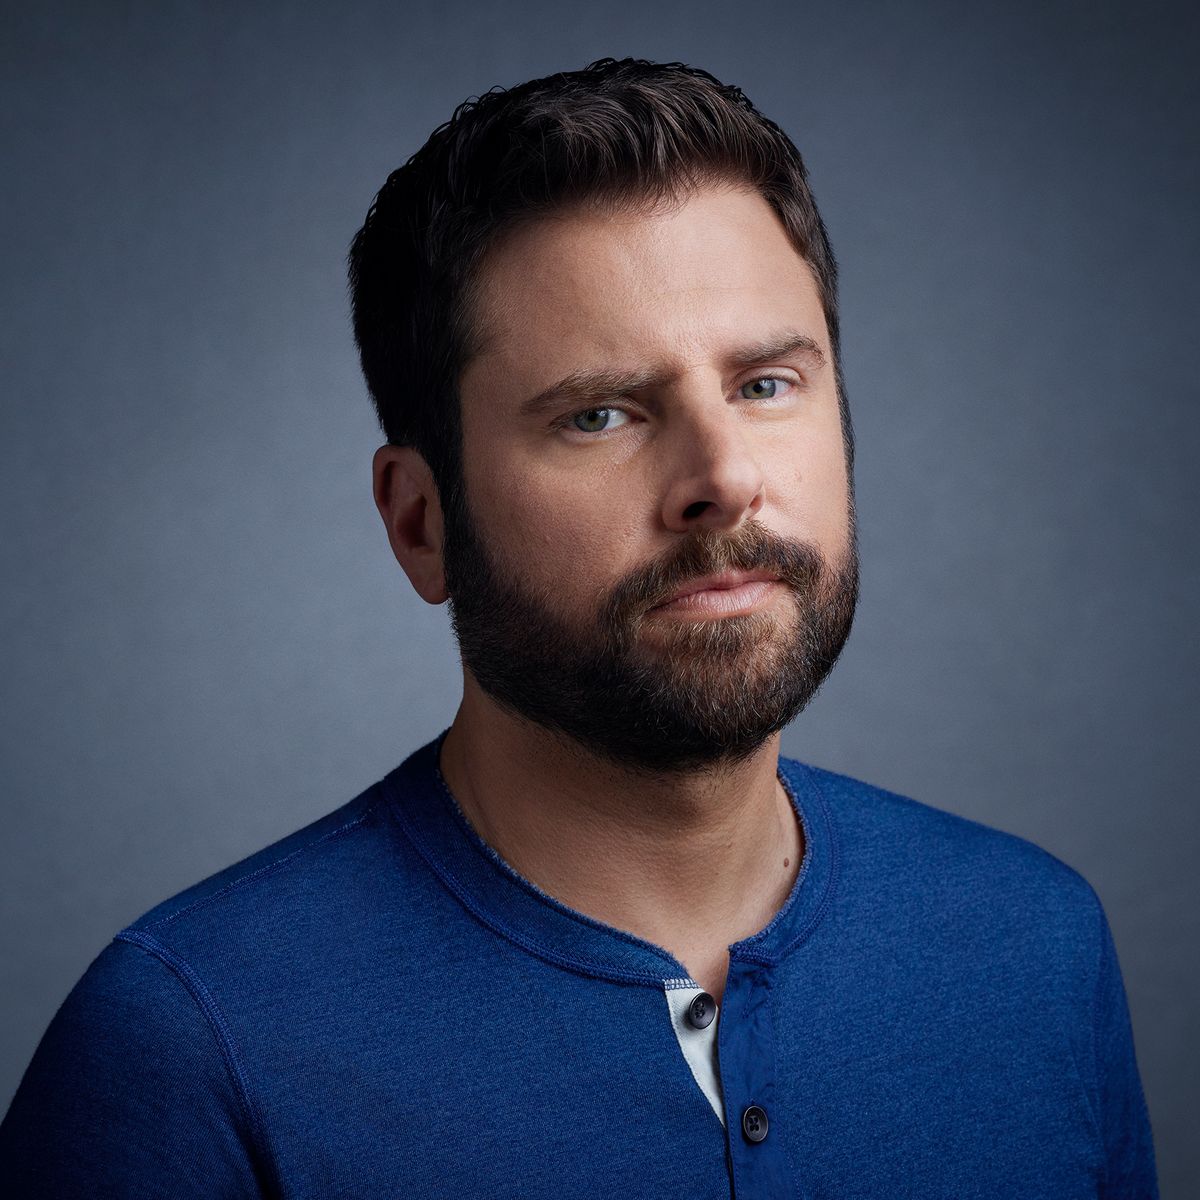 James Roday Rodriguez is an American actor, director and screenwriter. He is best known for starring on the USA Network series Psych as hyper-observant consultant detective and fake psychic Shawn Spencer. He stars in A Million Little Things, which debuted in 2018.